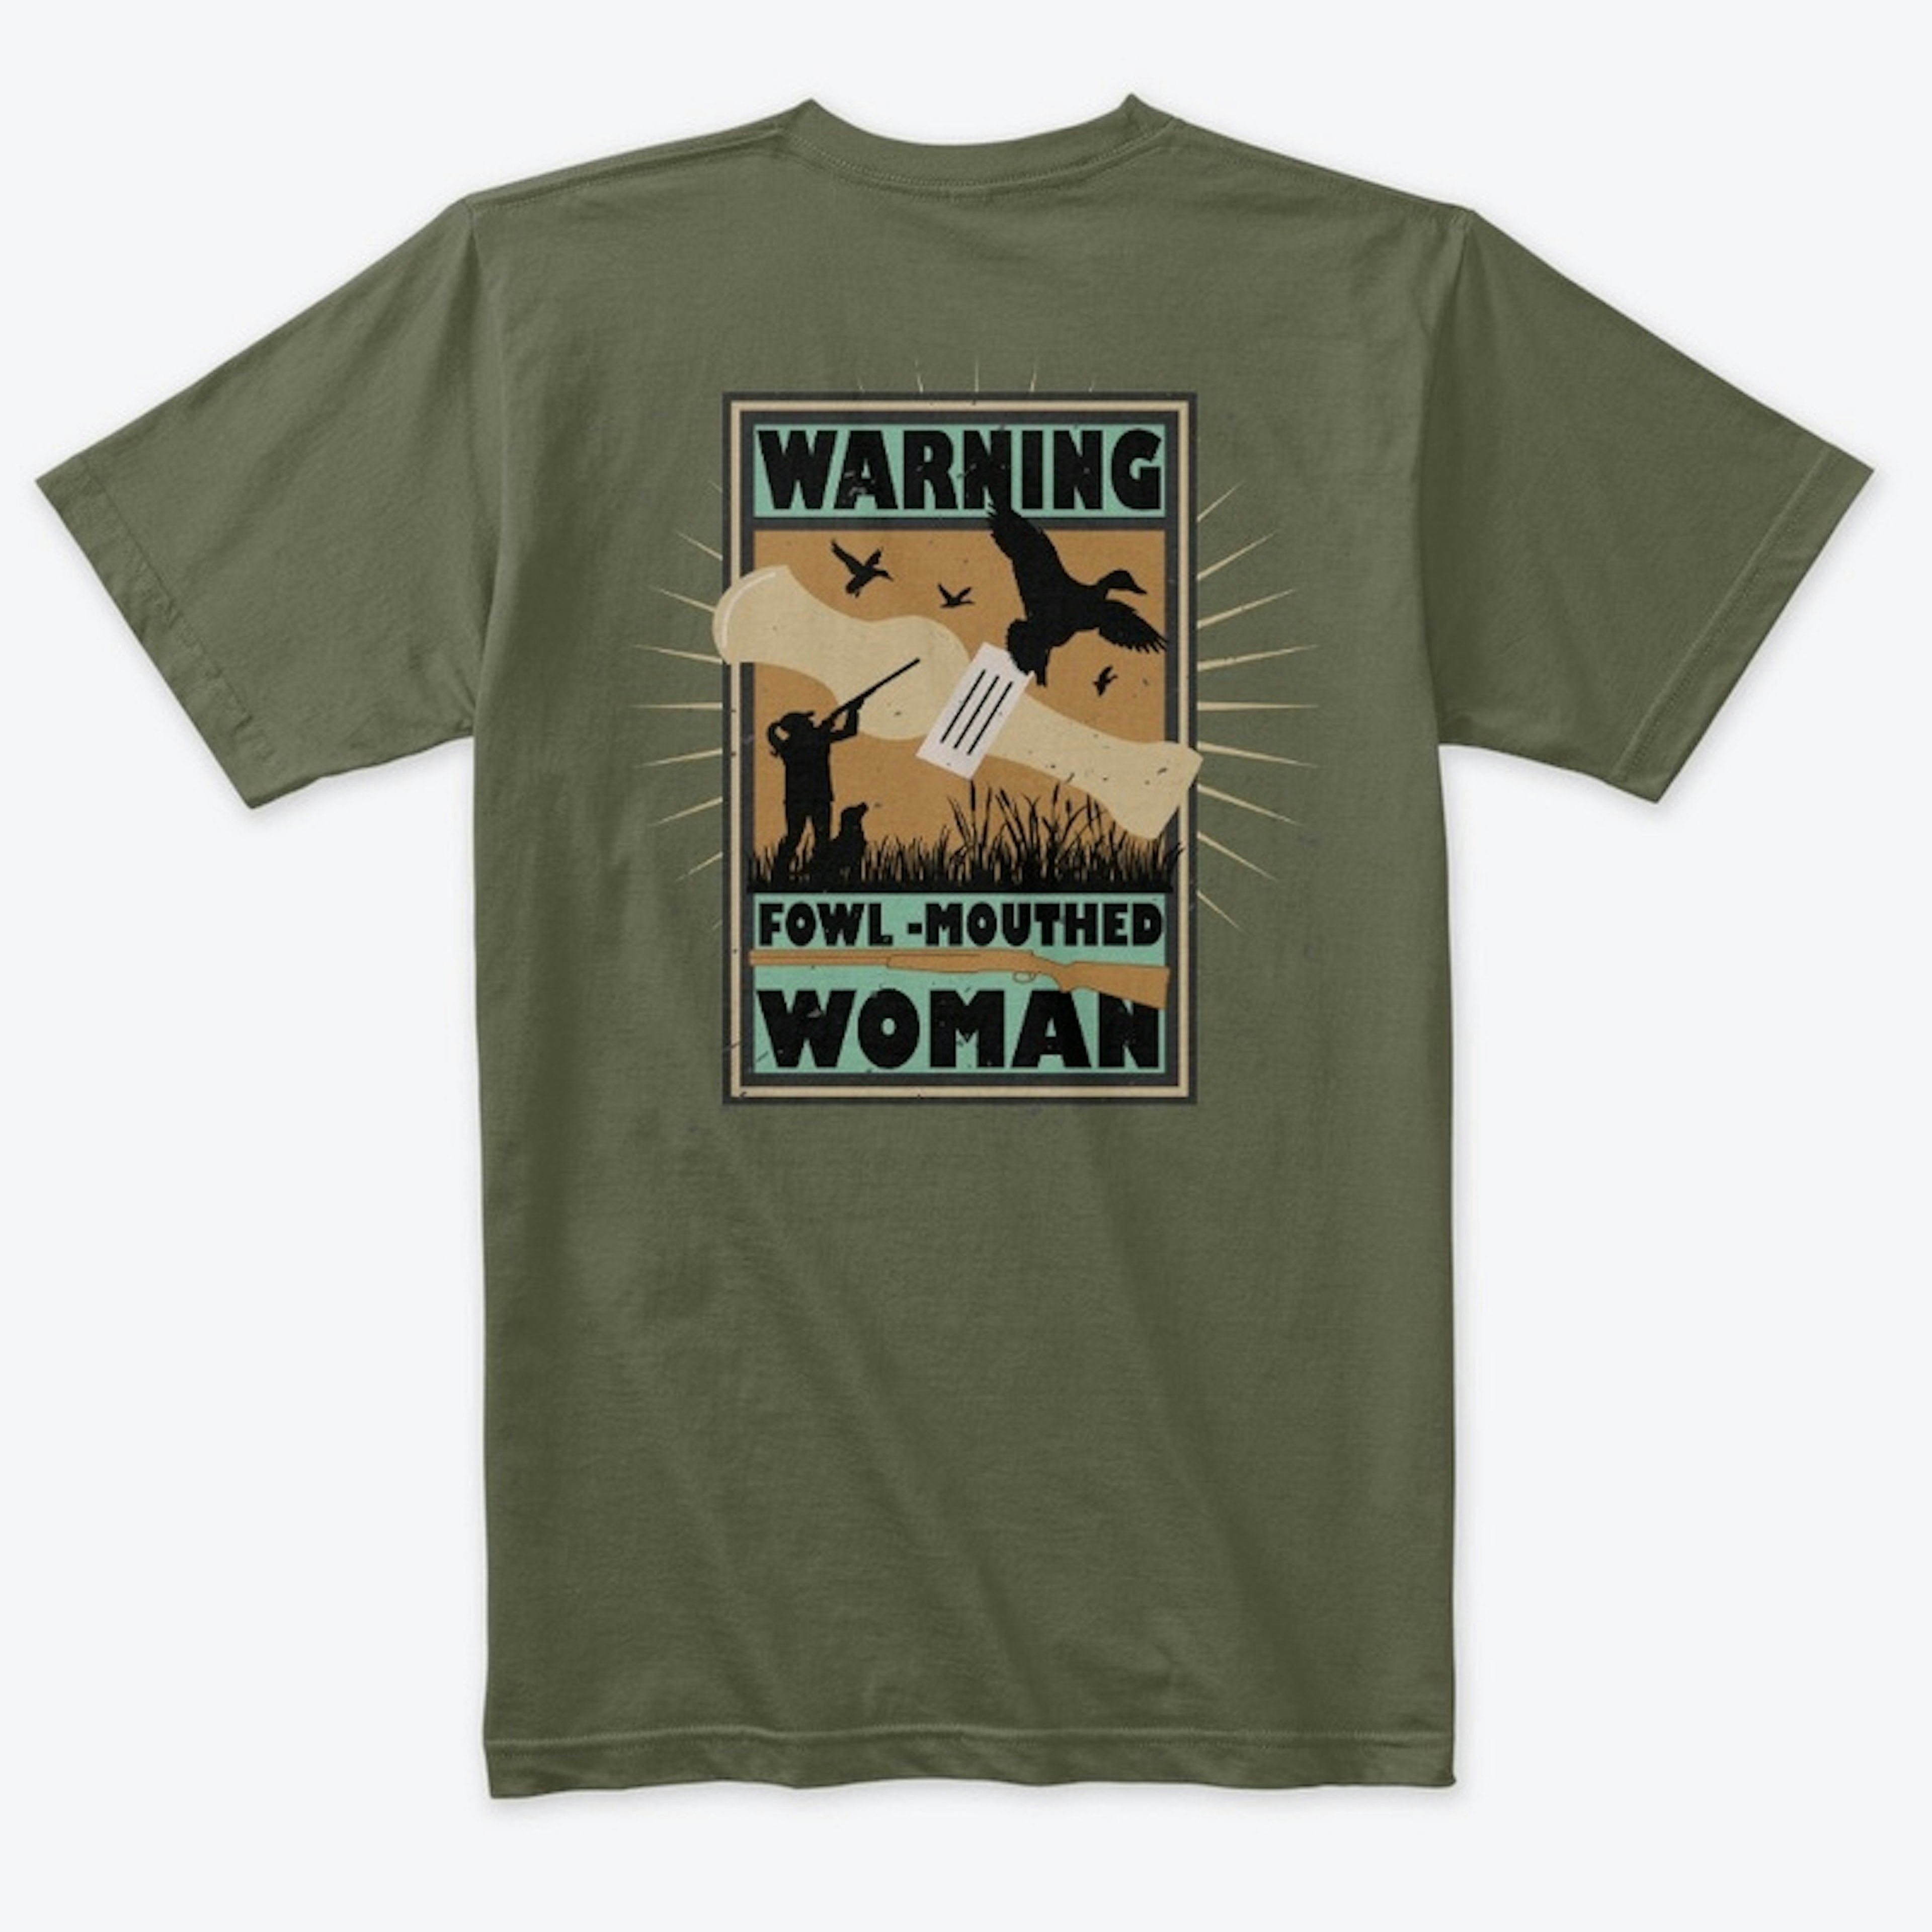 Warning: Fowl-Mouthed Woman